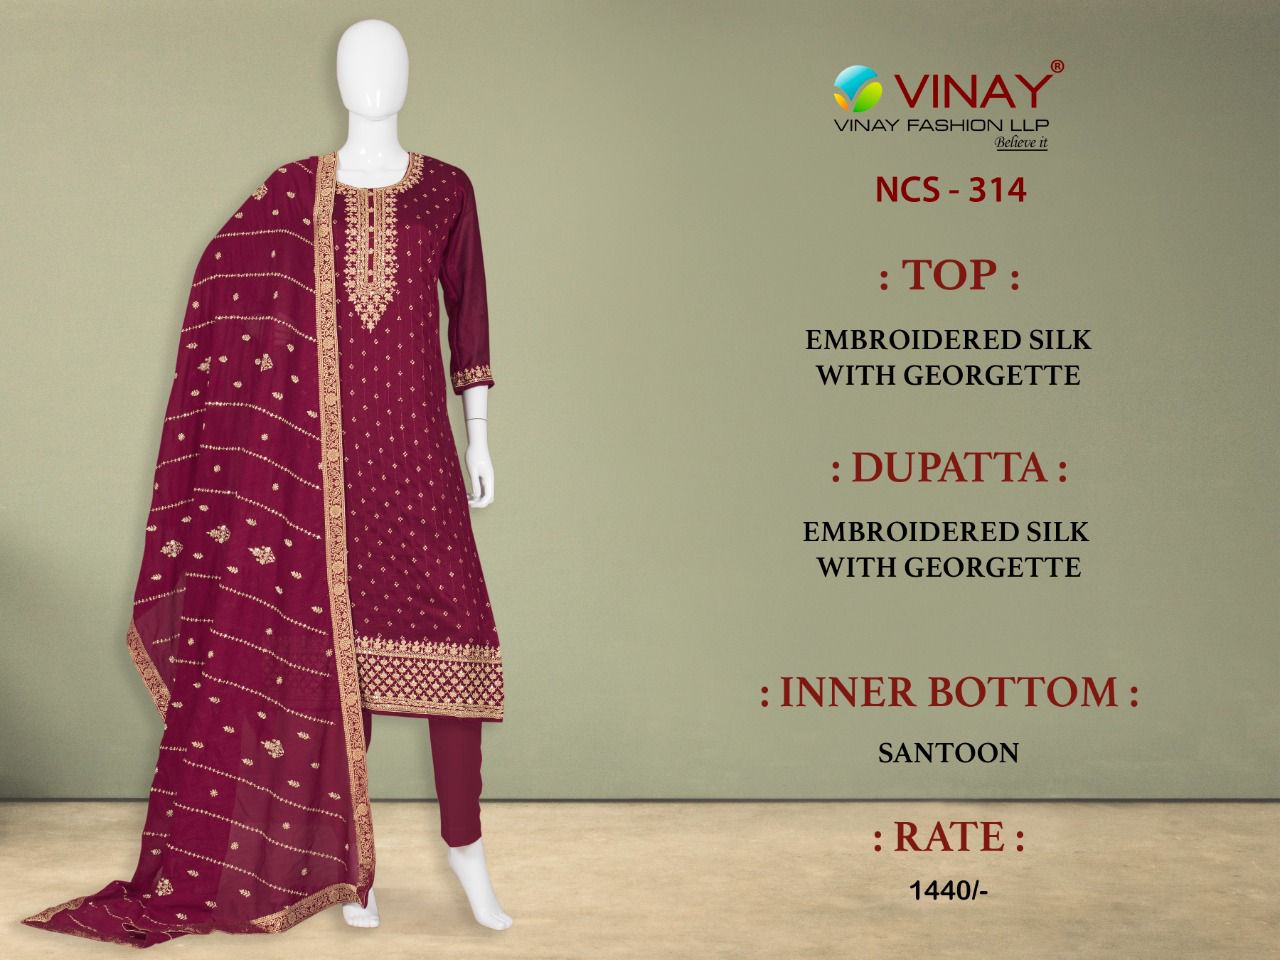 Vinay Fashion Llp Ncs 314 Pant Style Dress Material Catalog Lowest Price